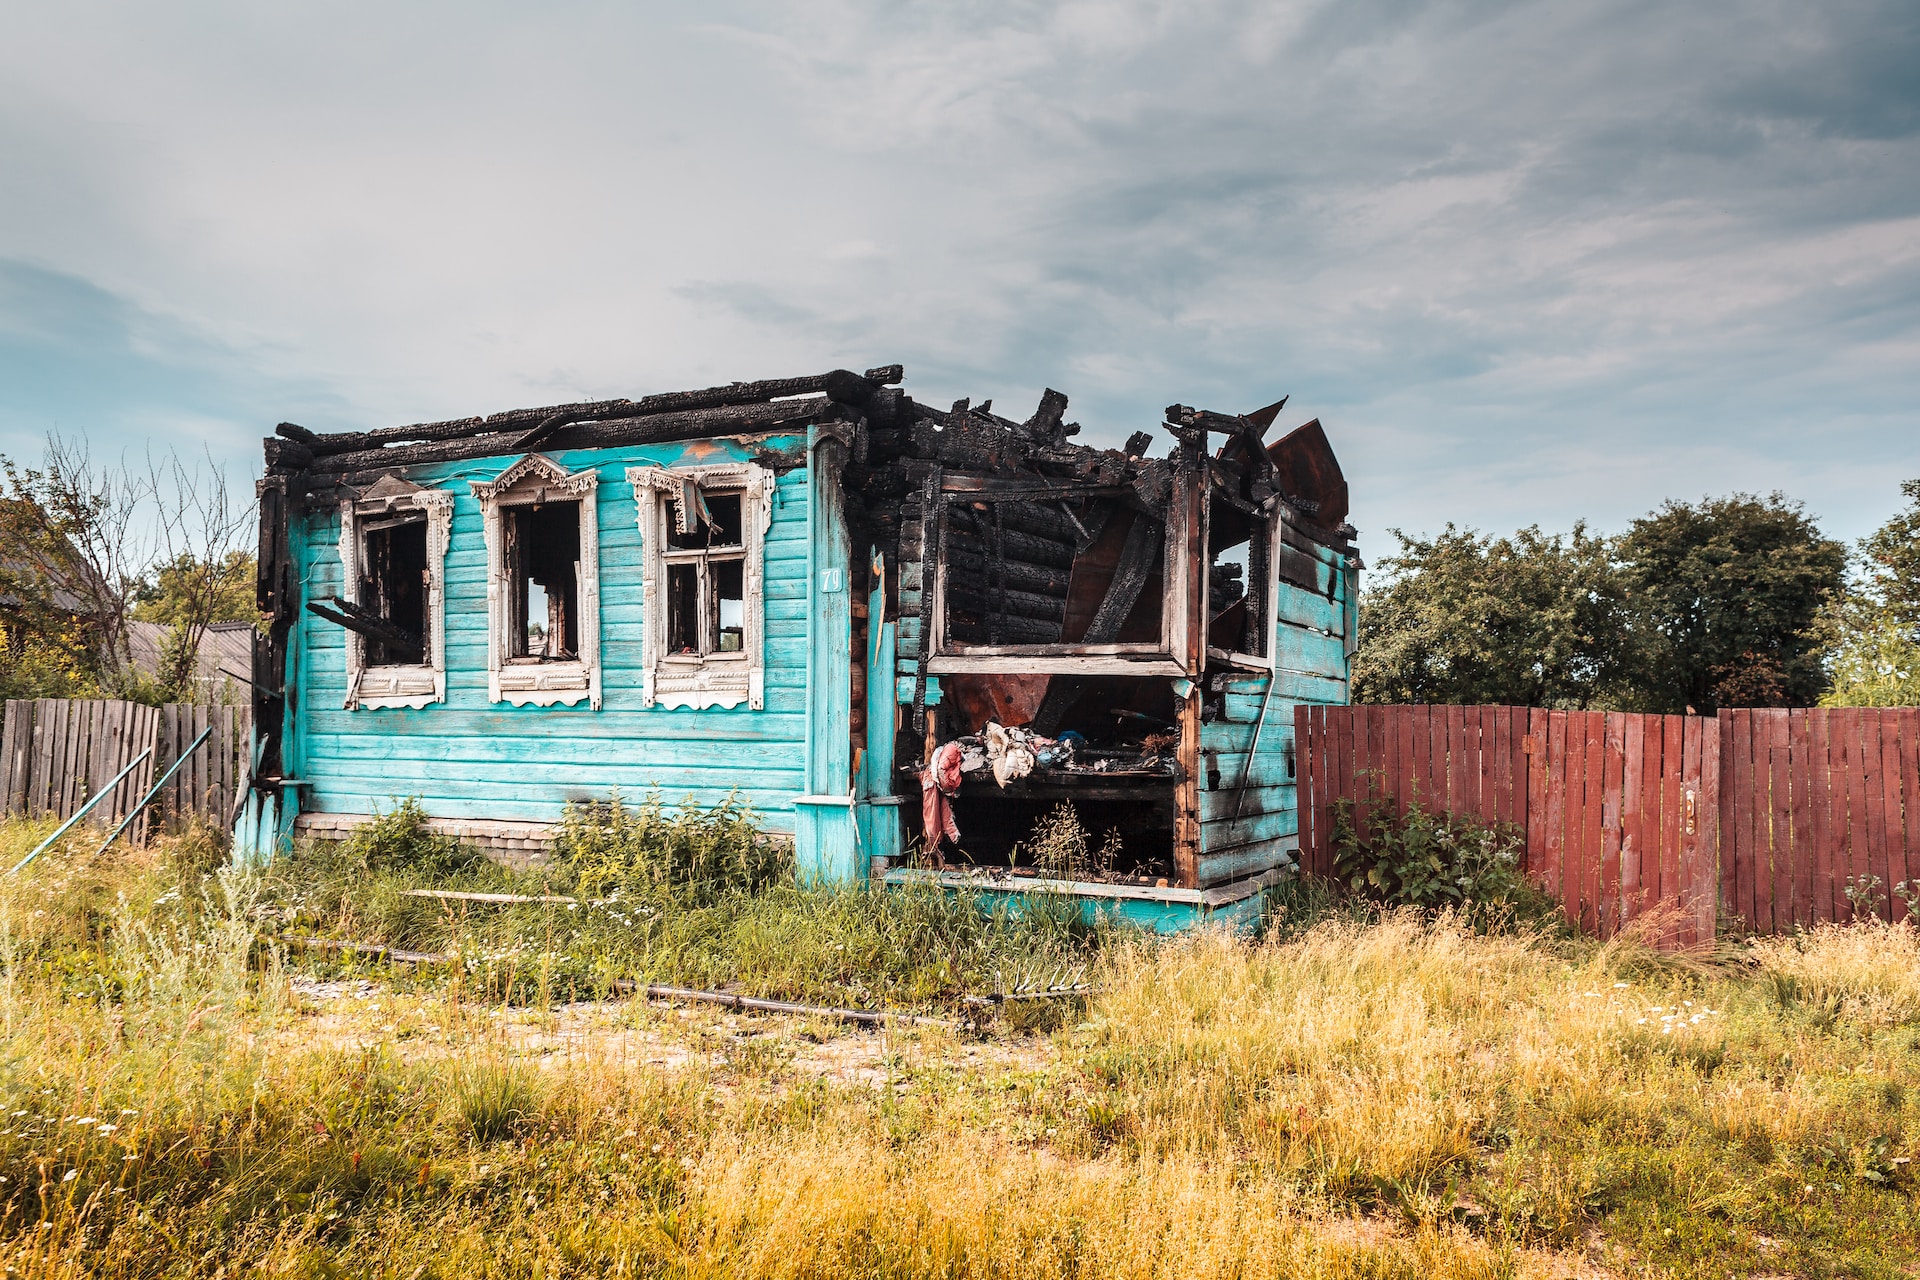 Fire Damage Restoration: Steps for Recovery and Rebuilding After a Fire